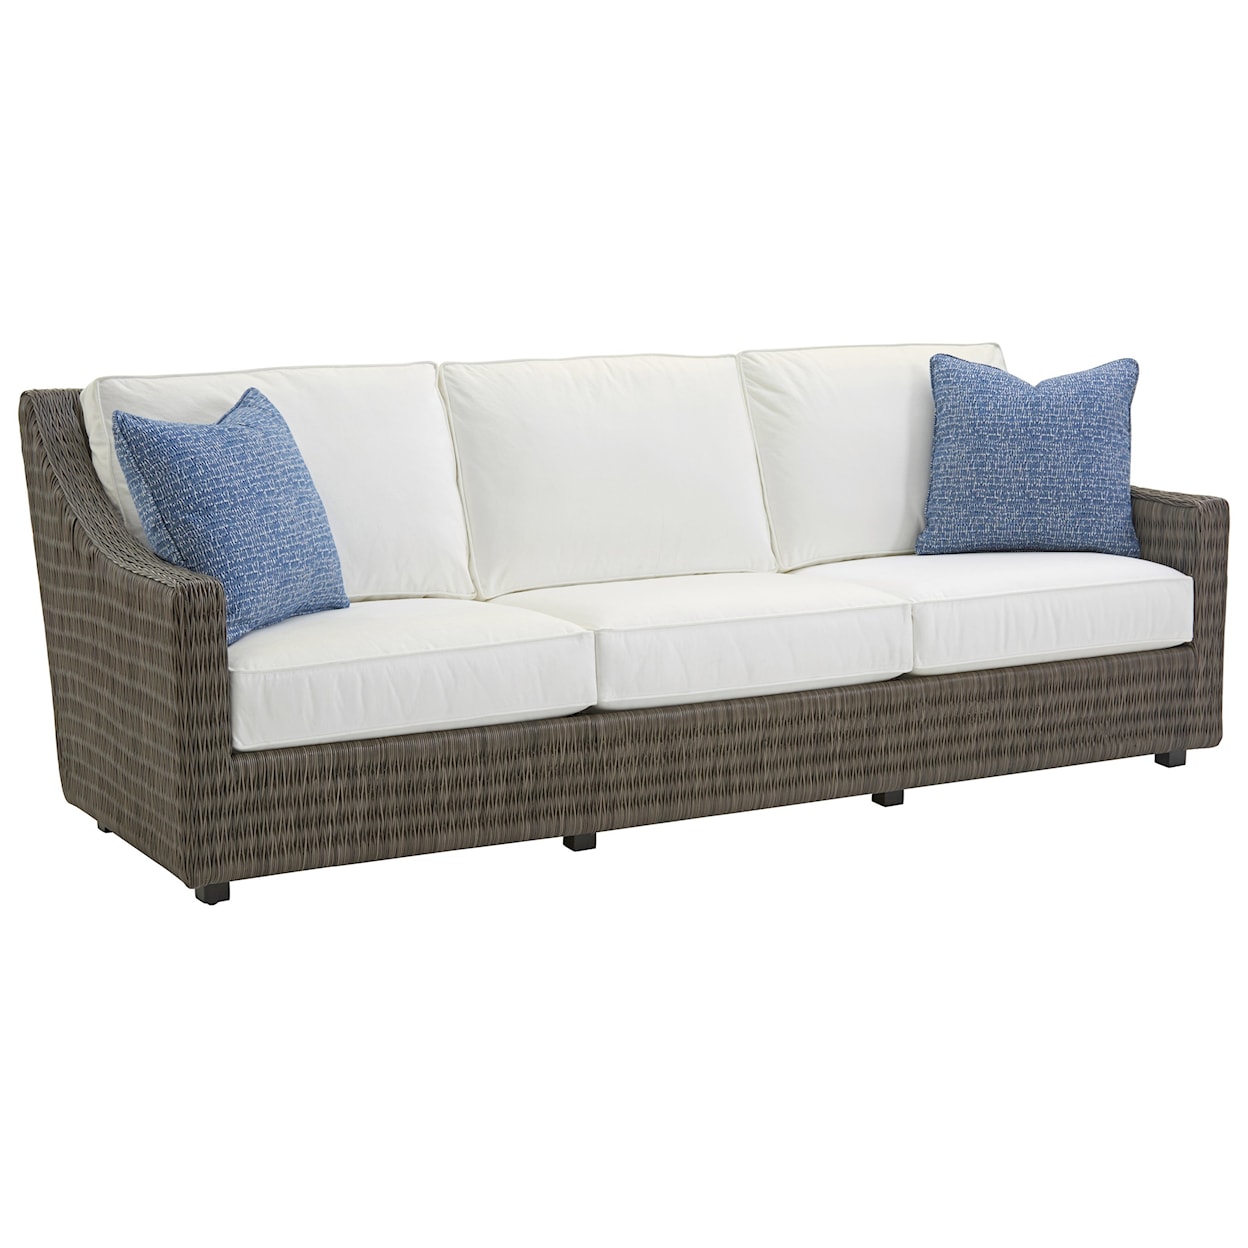 Tommy Bahama Outdoor Living Cypress Point Ocean Terrace Outdoor Sofa